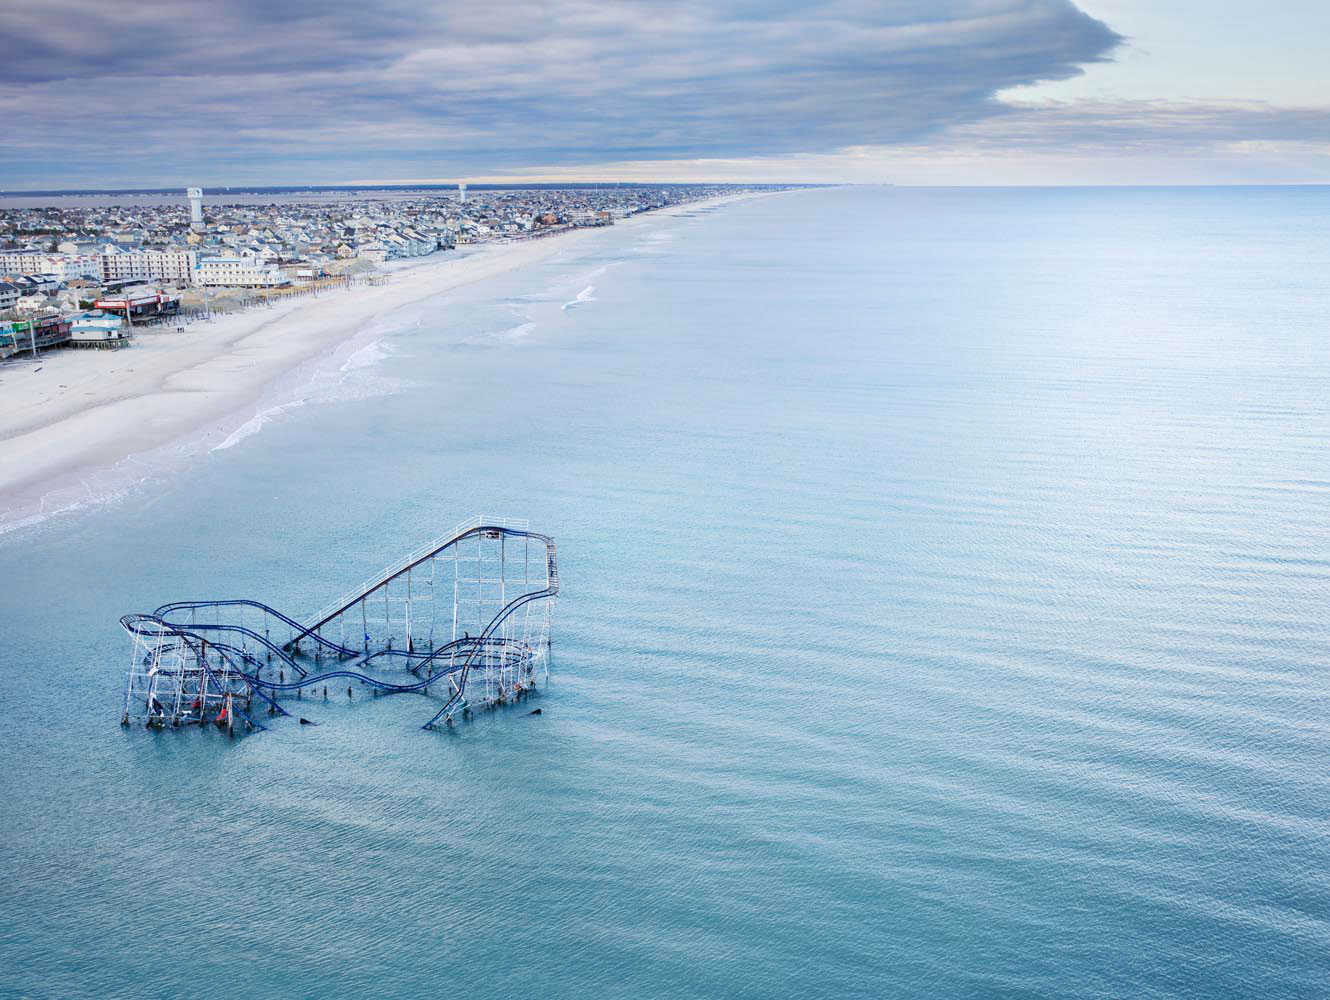 The Star Jet roller coaster at Casino Pier amusement park, once a Jersey Shore landmark, remains partly submerged in the Atlantic, Seaside Heights, N.J., 2012